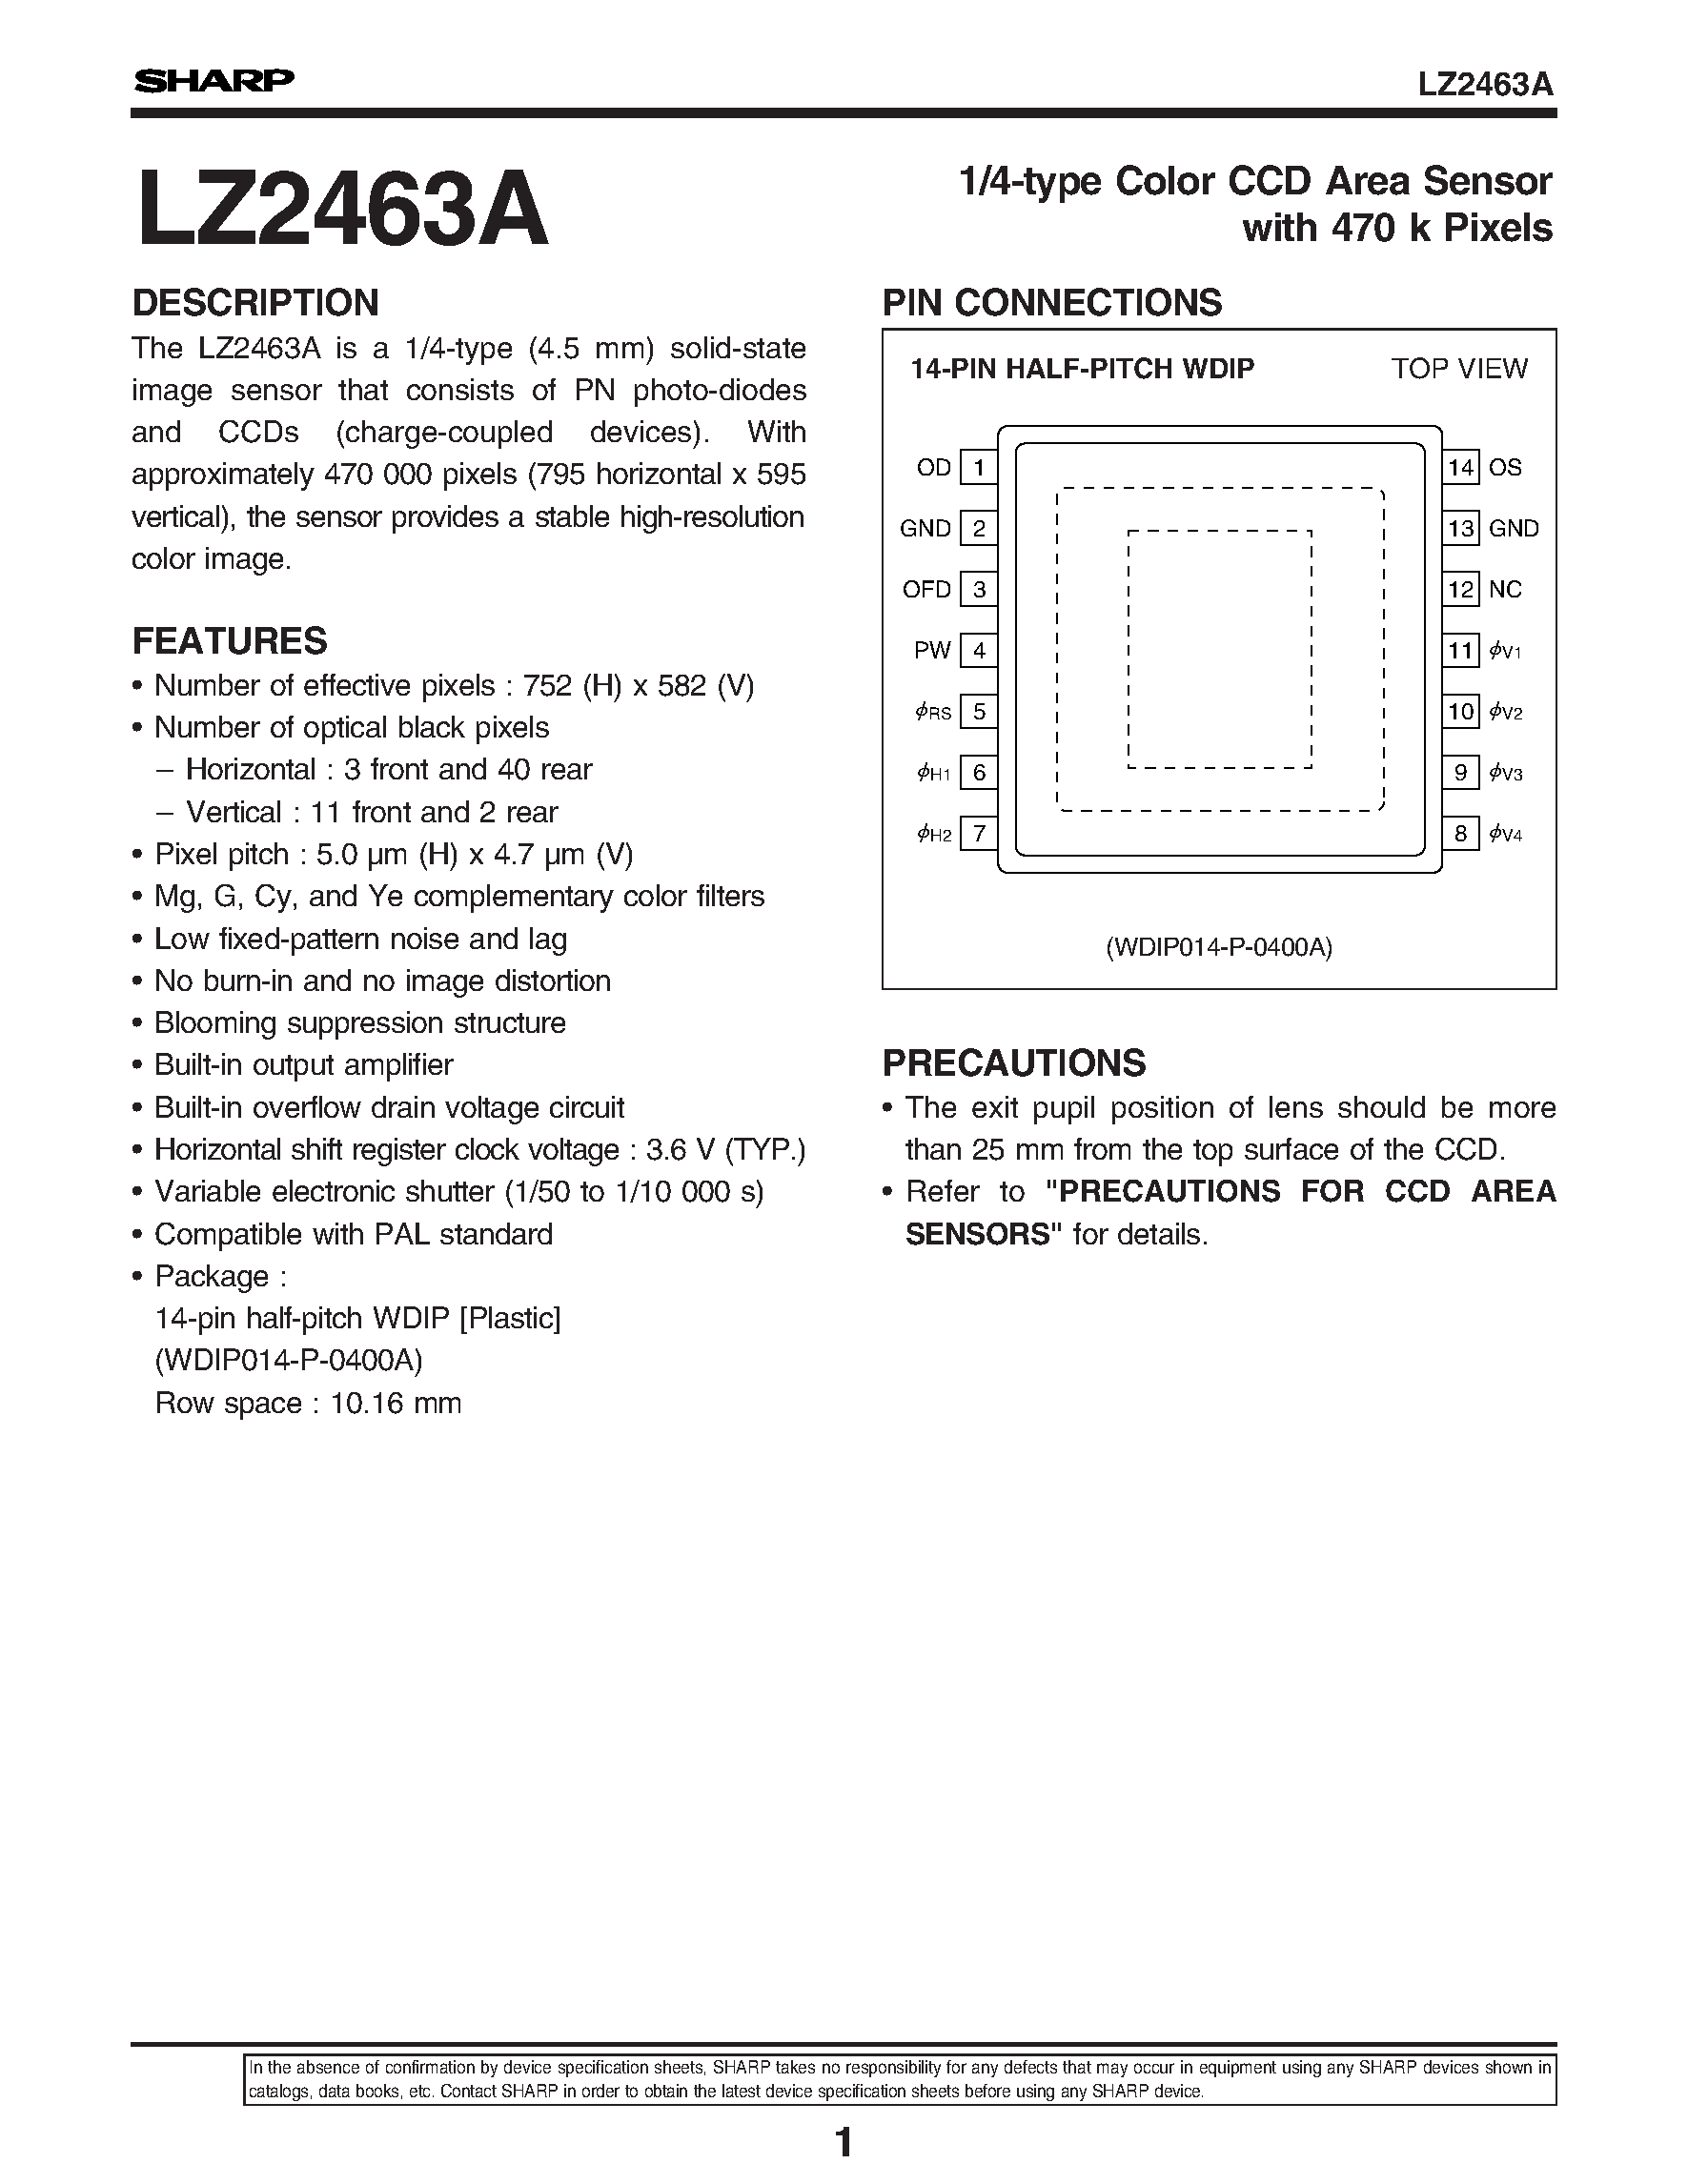 Datasheet LZ2463A - 1/4-type Color CCD Area Sensor with 470 k Pixels page 1